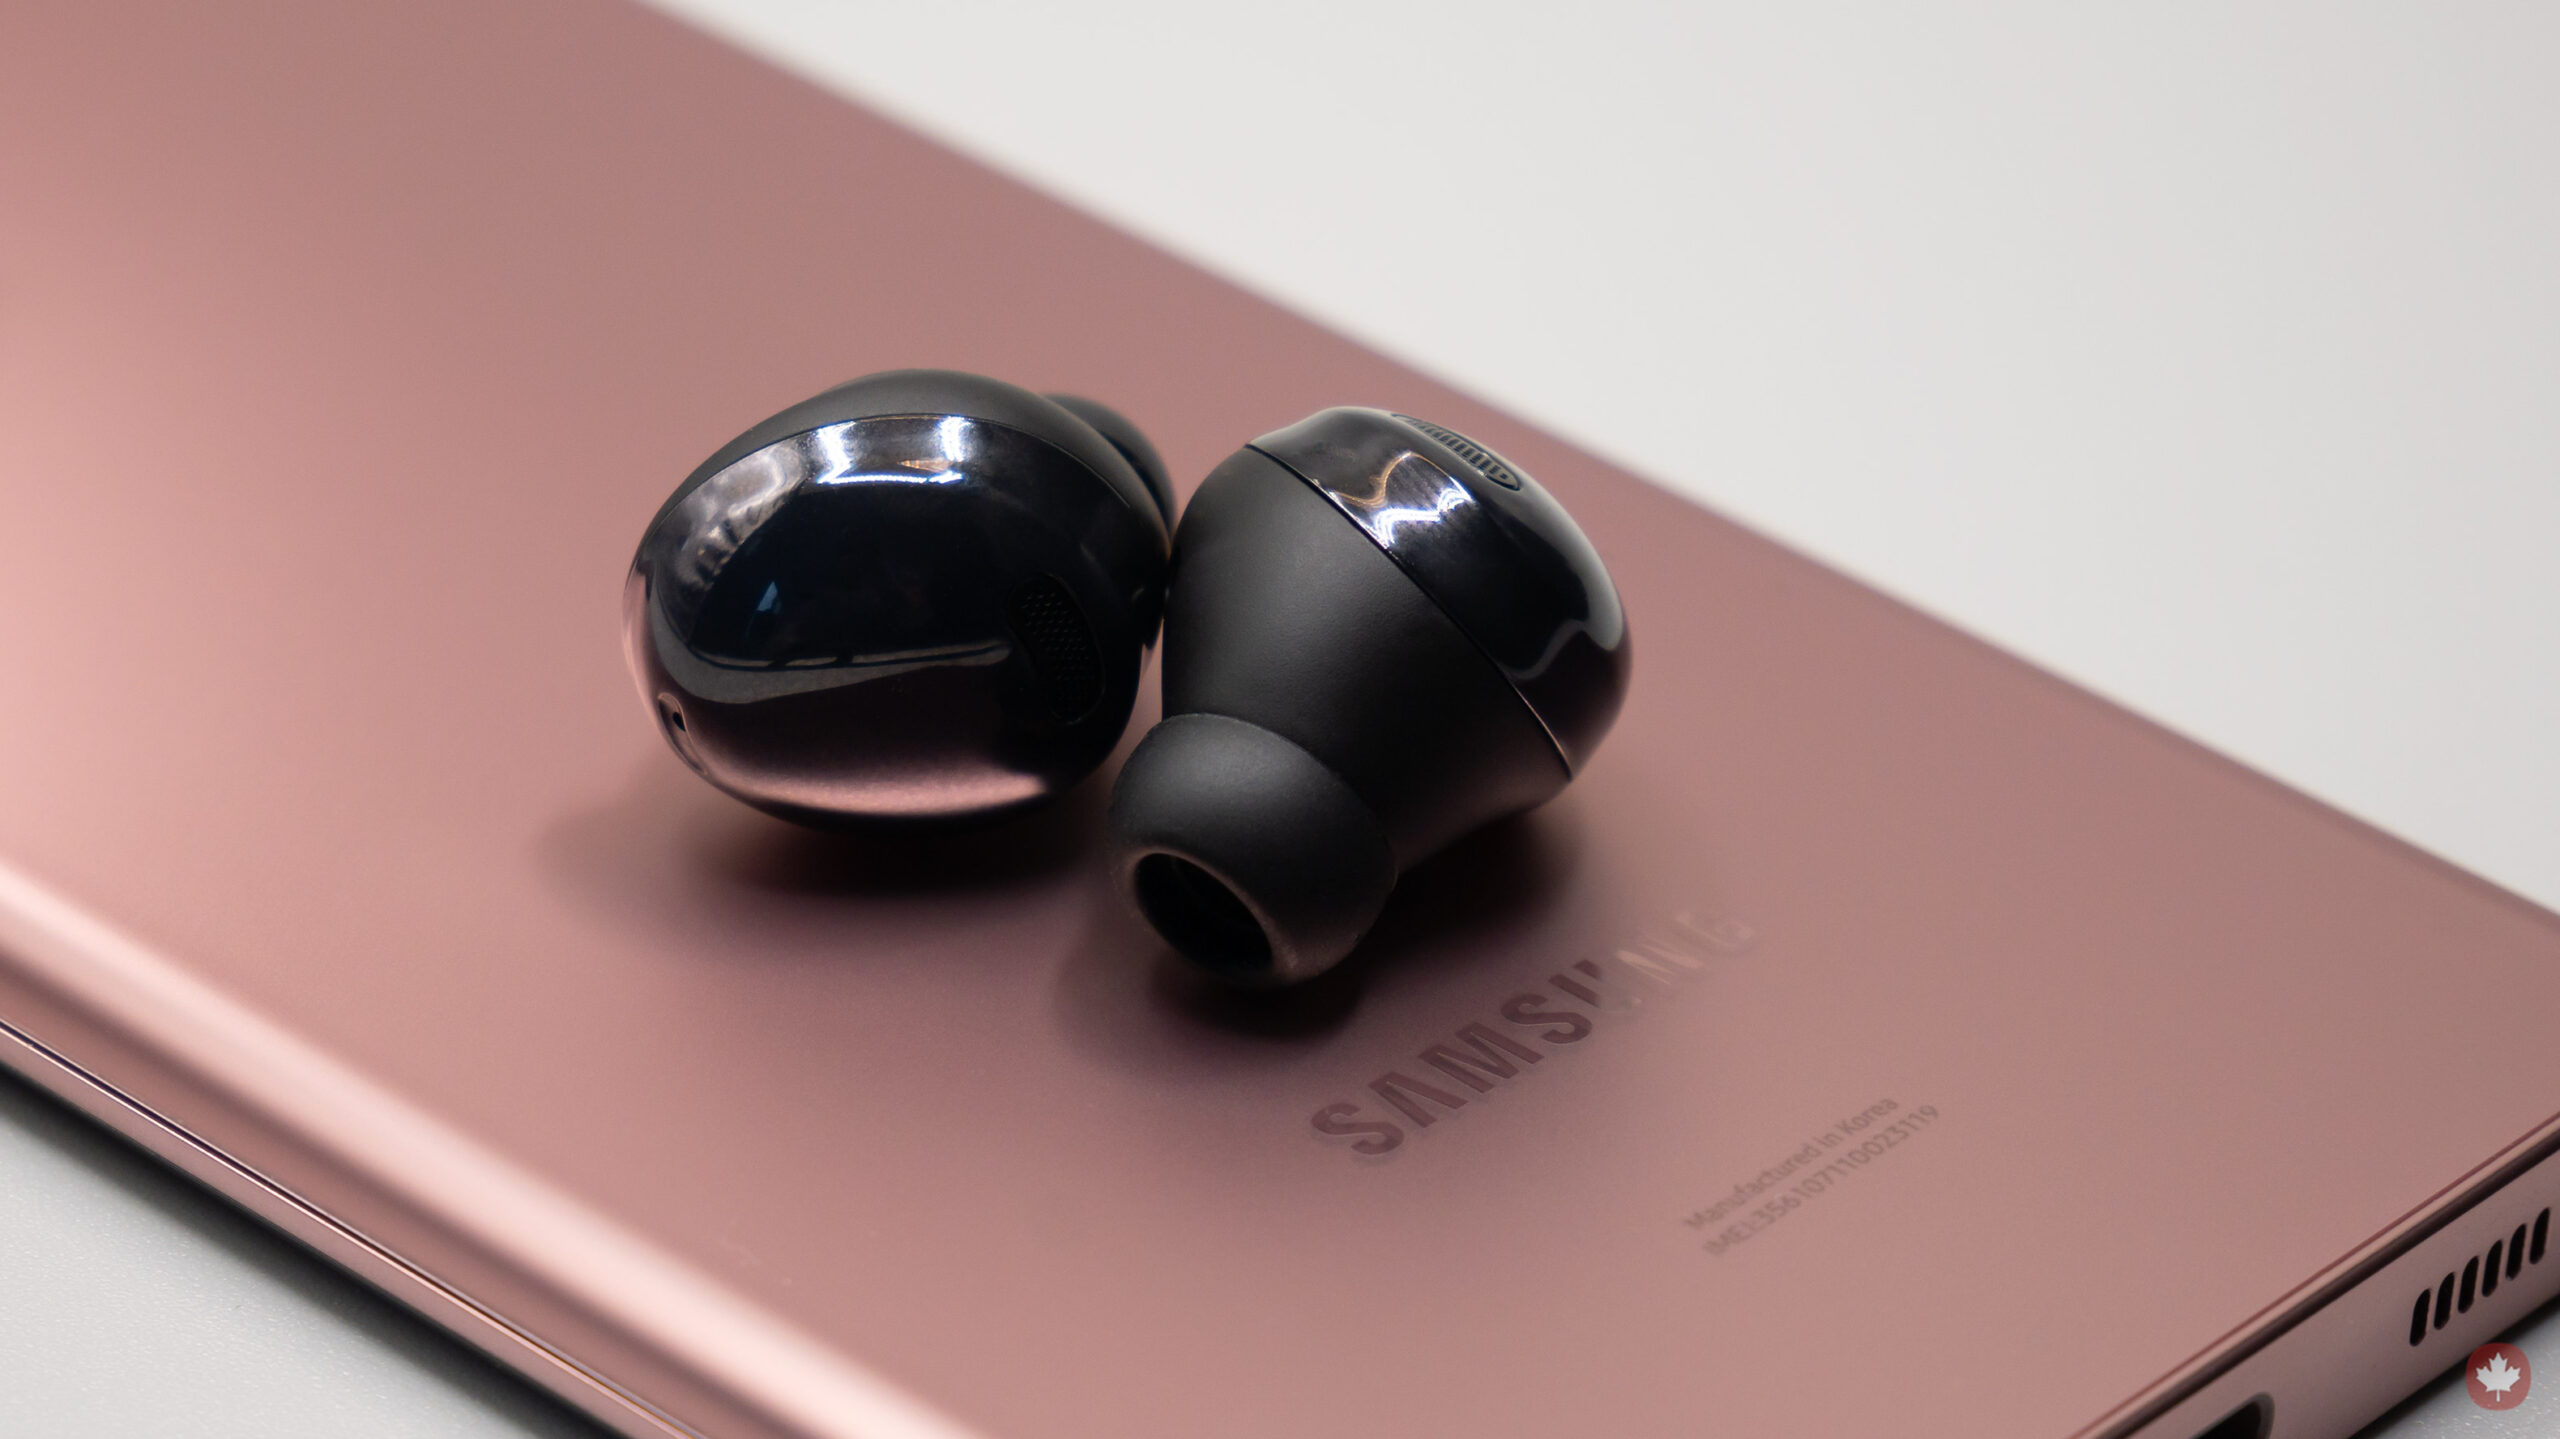 Samsung Galaxy Buds Pro available for an all-time low of $199.99 